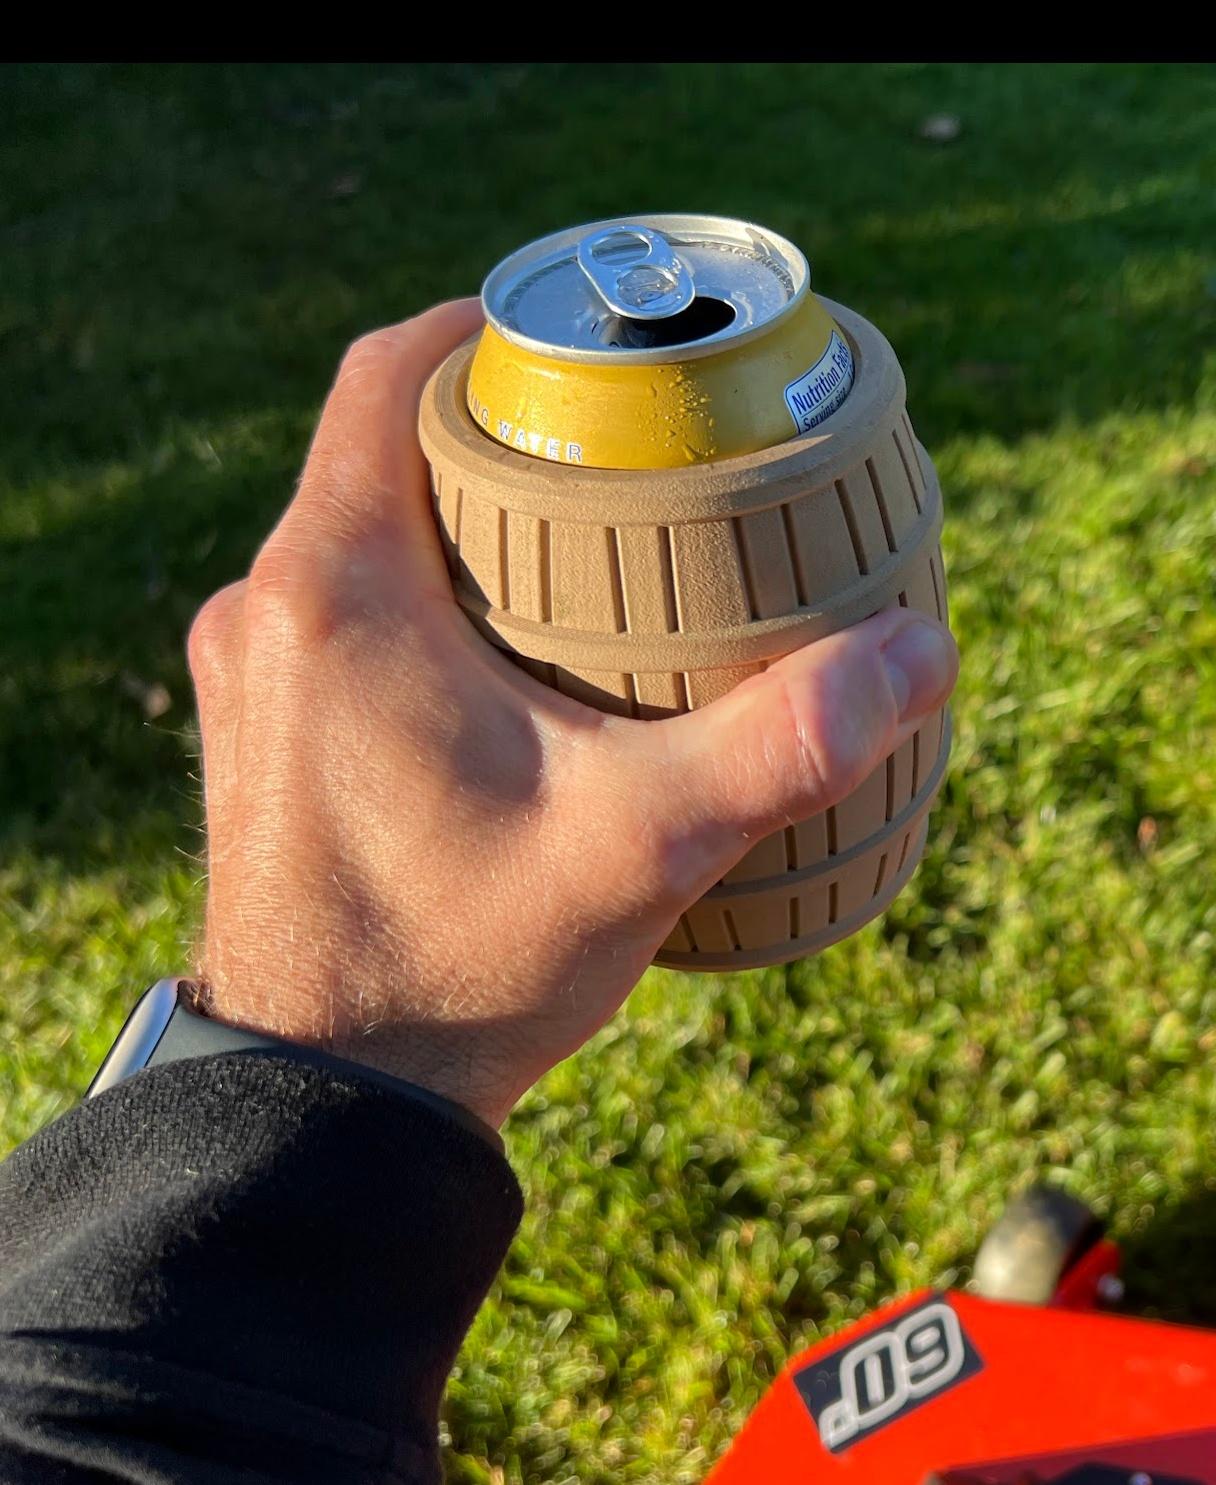 Root Beer Barrel - 12oz Can Coozie aka Stein for your Soda Pop Cans! - Barrel Can Coozie wihtout handle - fits perfect in the cup holder of the Bay Boy Lawn mower!  - 3d model